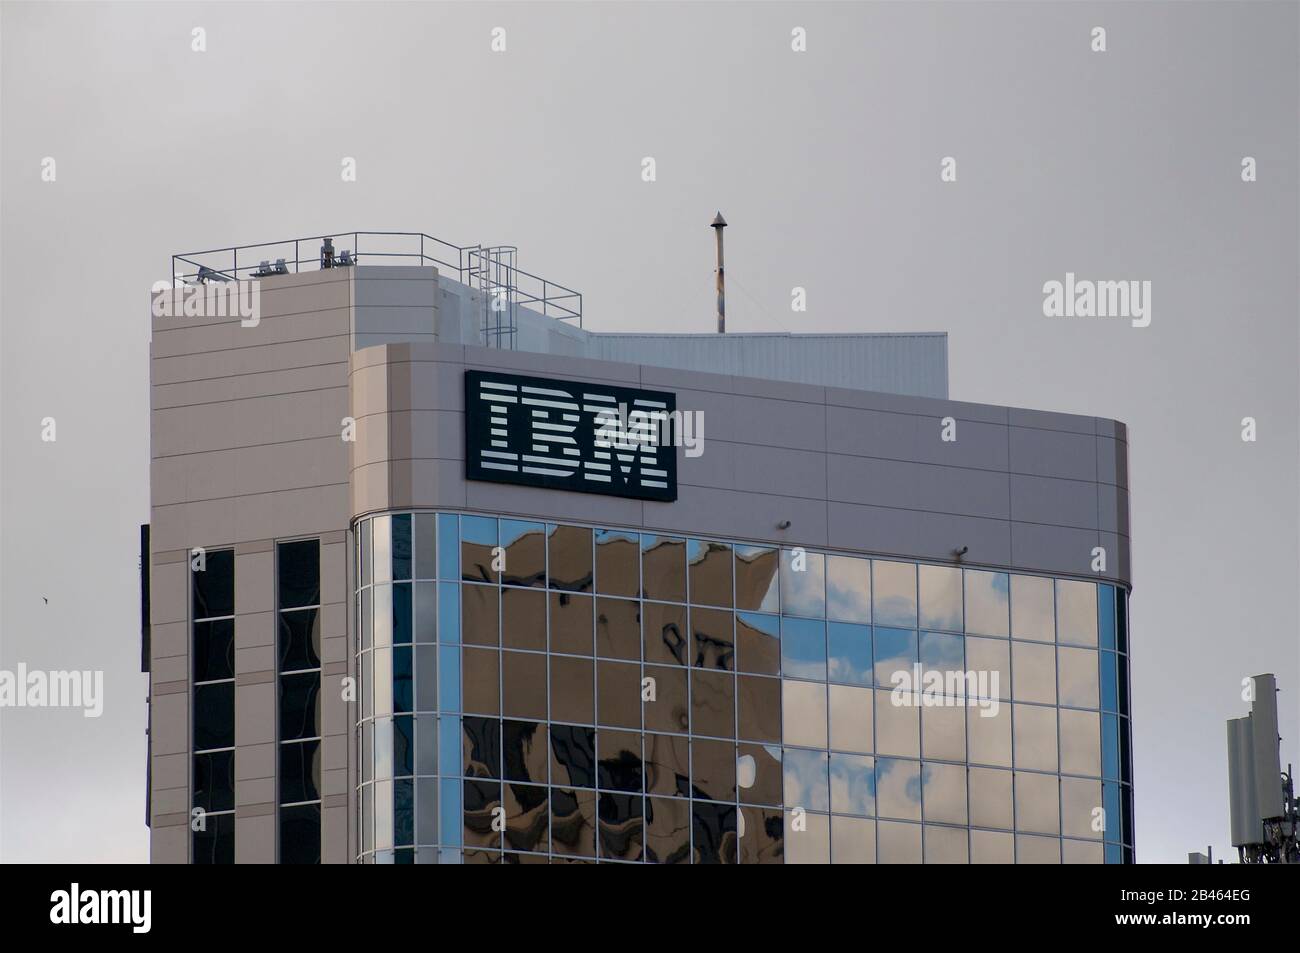 Brisbane, QLD, Australia - 26th January 2020 : IBM (International Business Machines Corporation) sign hanging on a building in Brisbane. IBM is an Ame Stock Photo